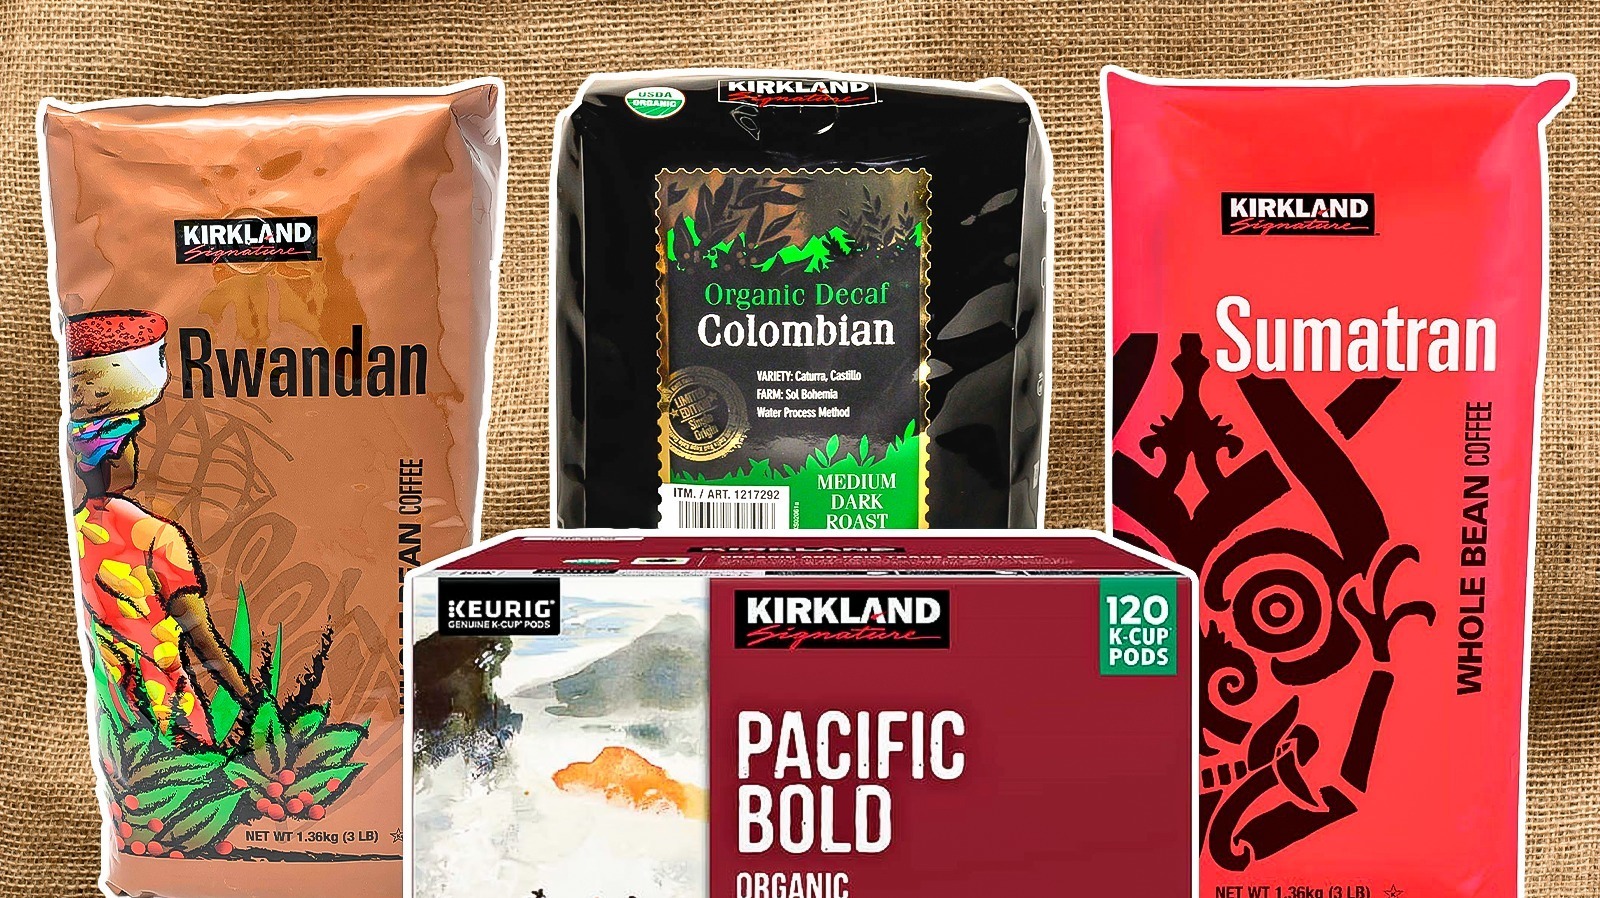 https://www.thedailymeal.com/img/gallery/the-ultimate-ranking-of-kirkland-brand-coffee/l-intro-1687374652.jpg